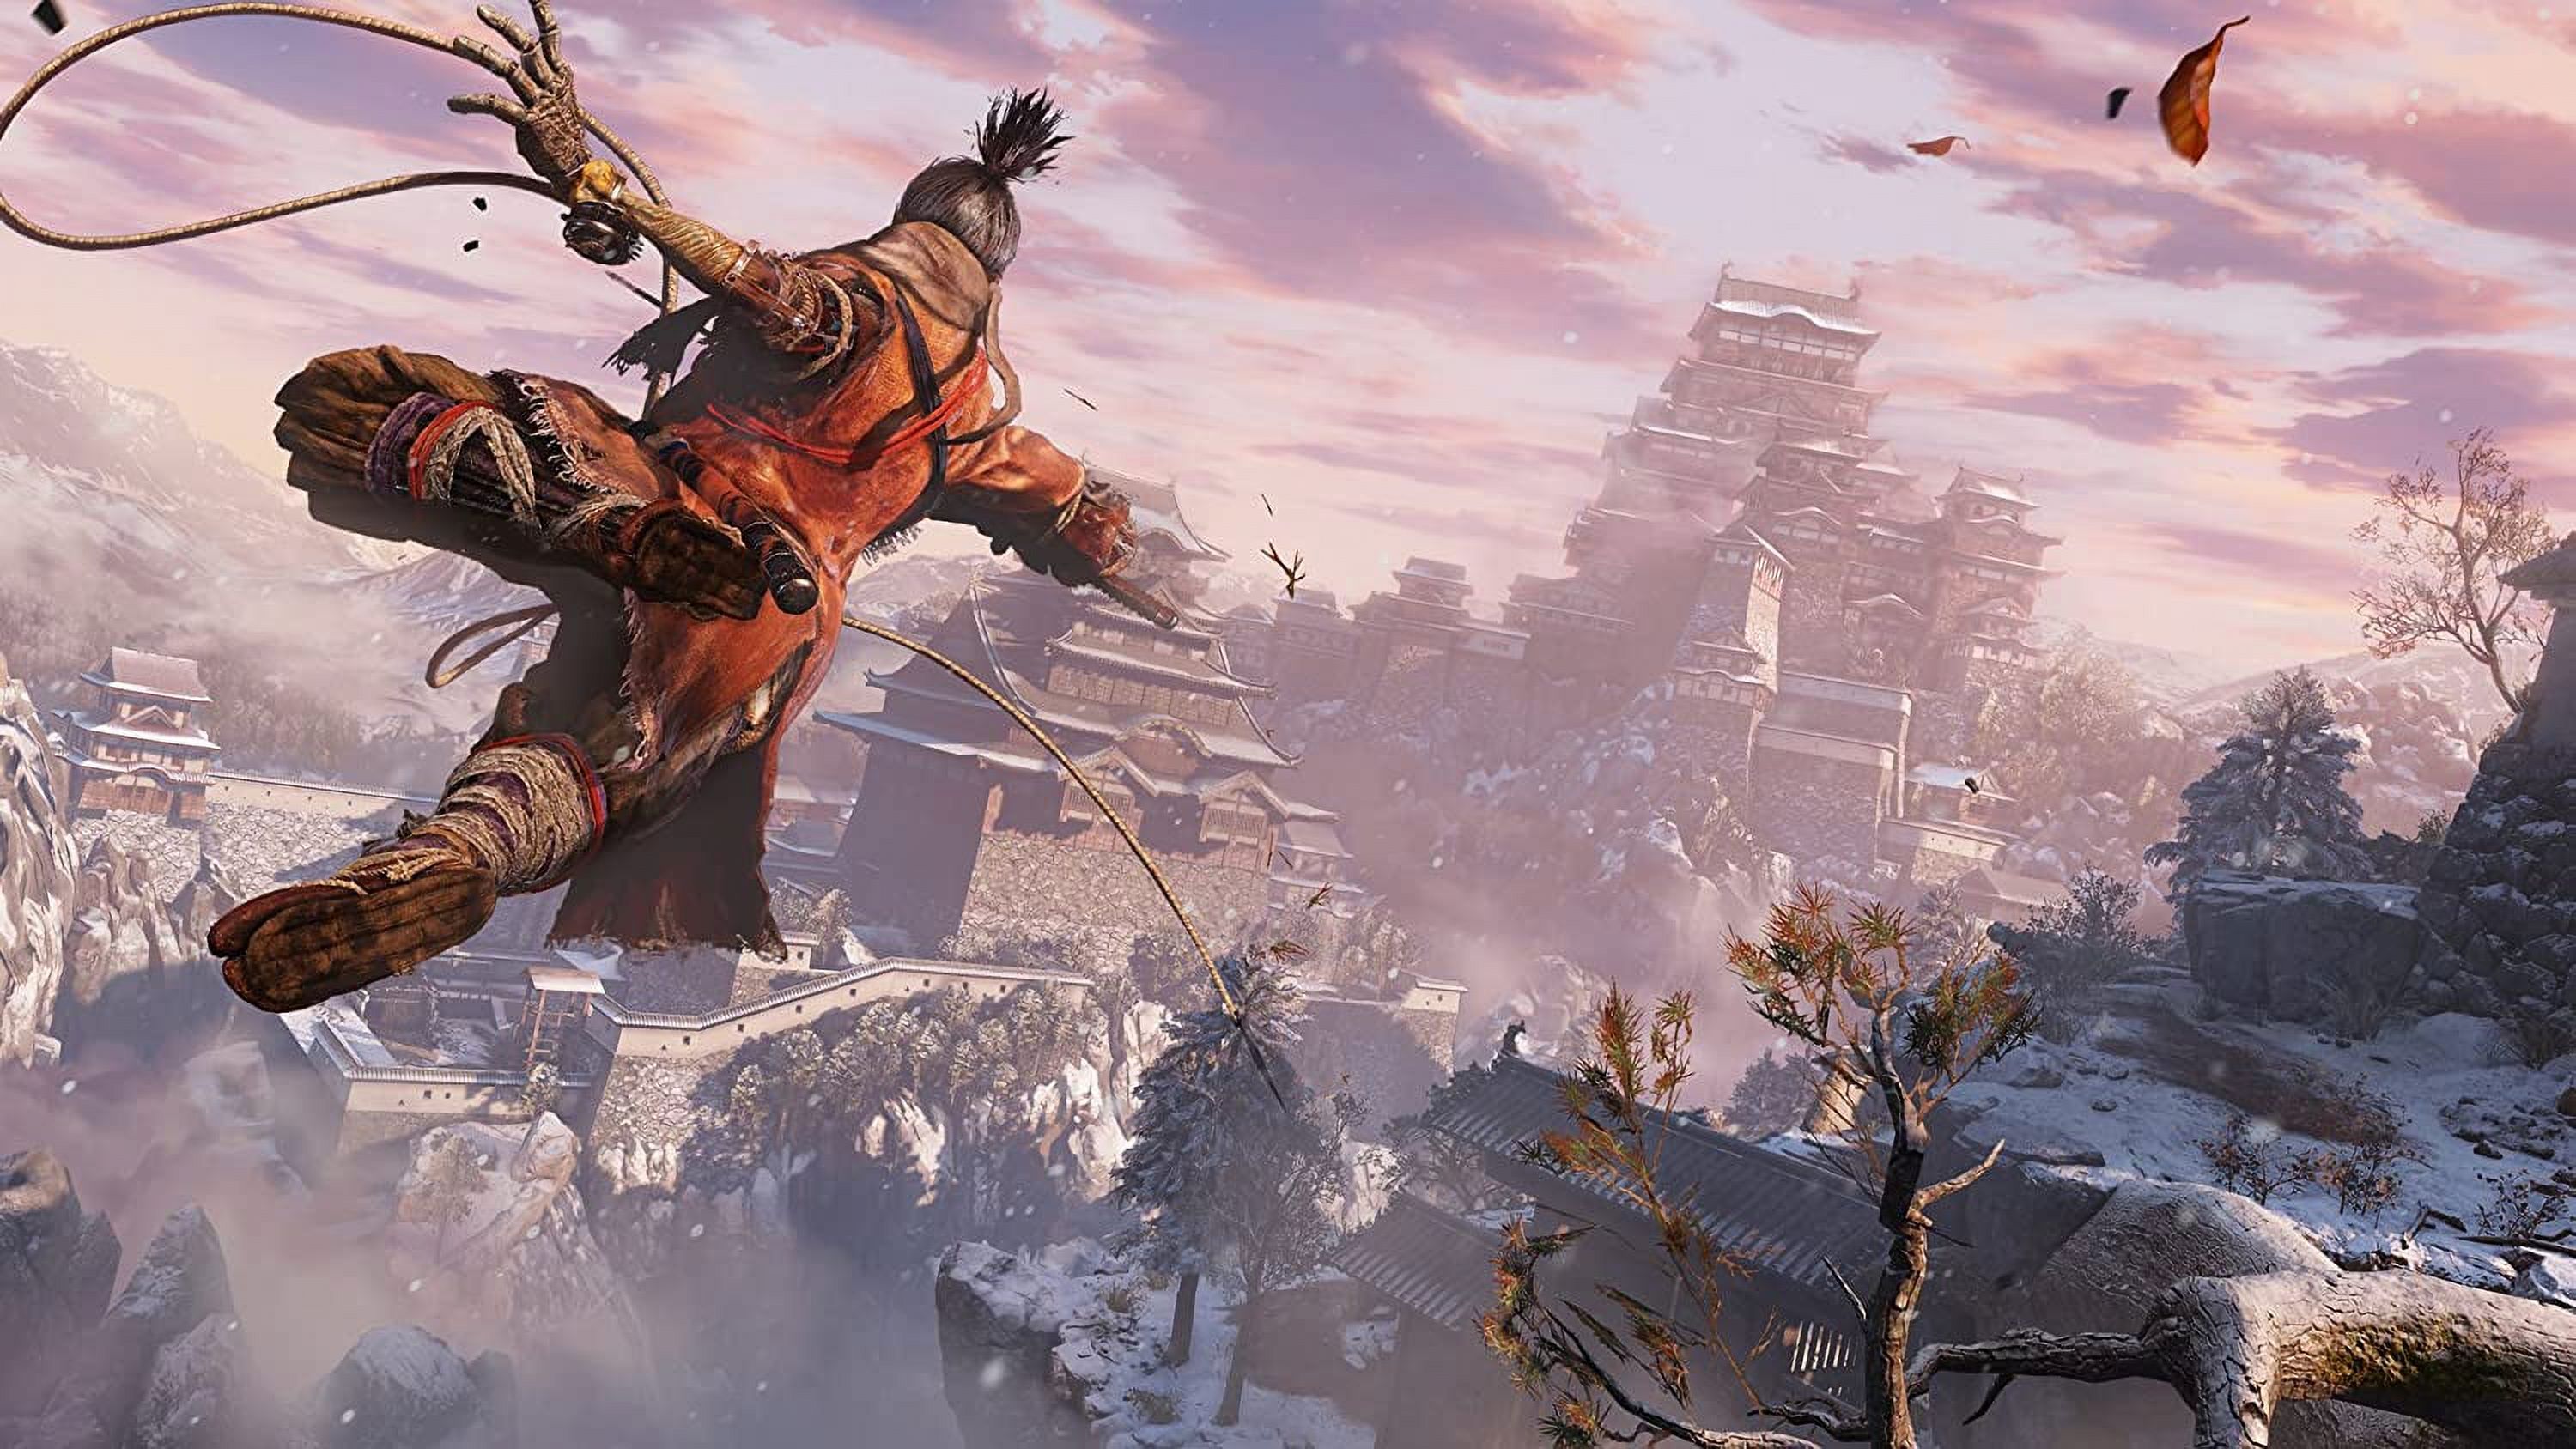 Sekiro: Shadows Die Twice, Activision, PlayStation 4, 047875882928 - image 3 of 5